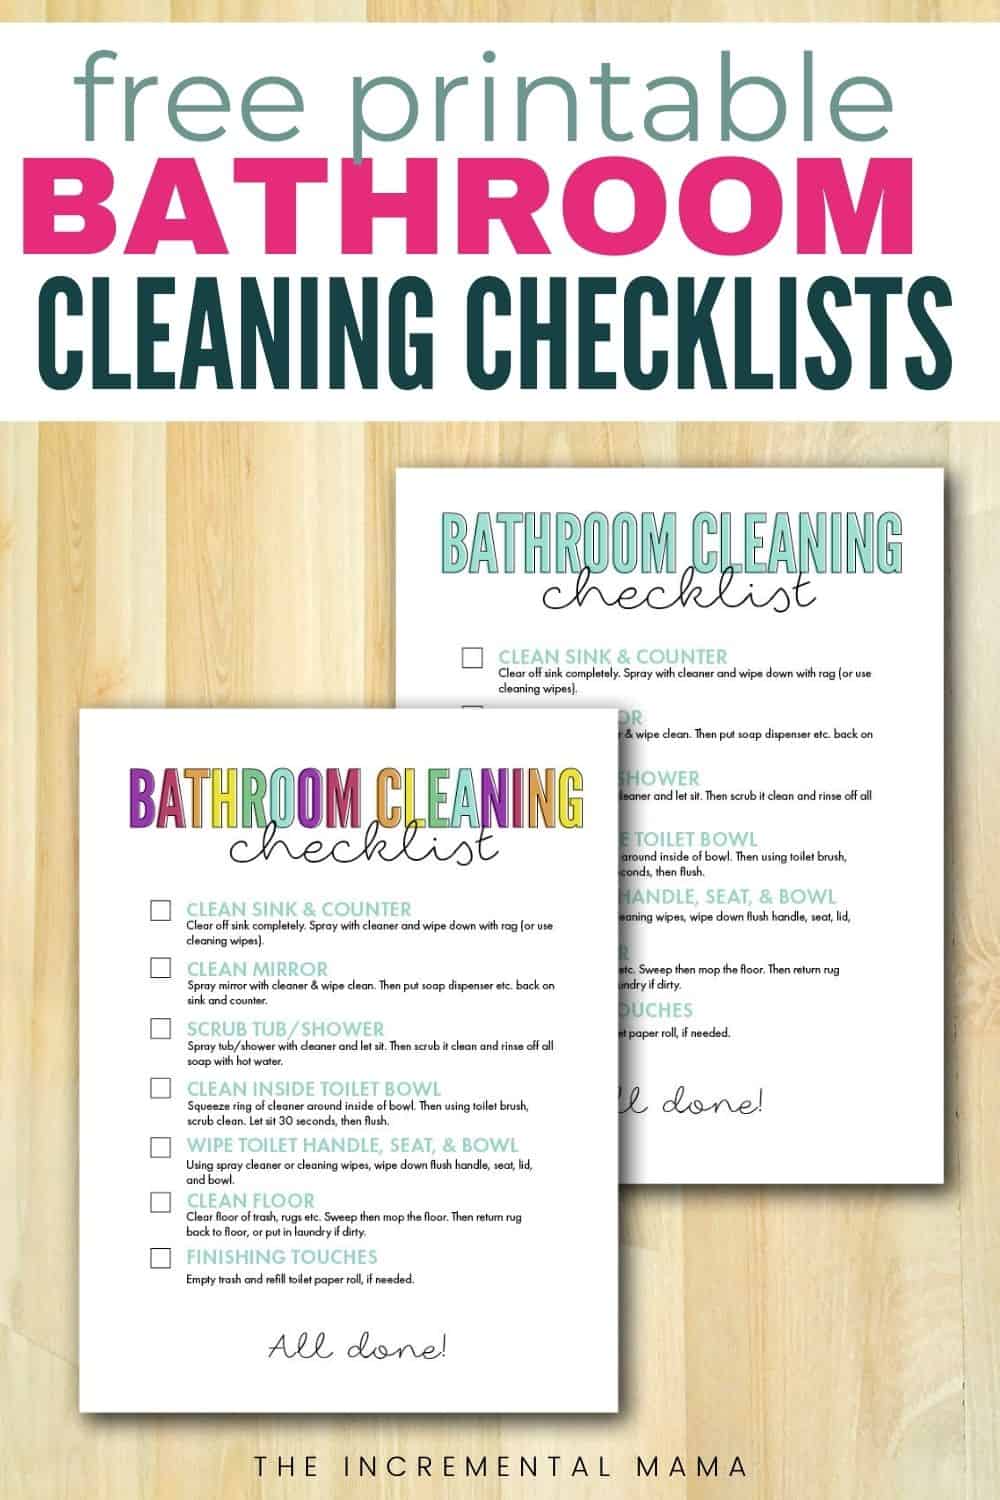 free-printable-bathroom-cleaning-checklist-for-kids